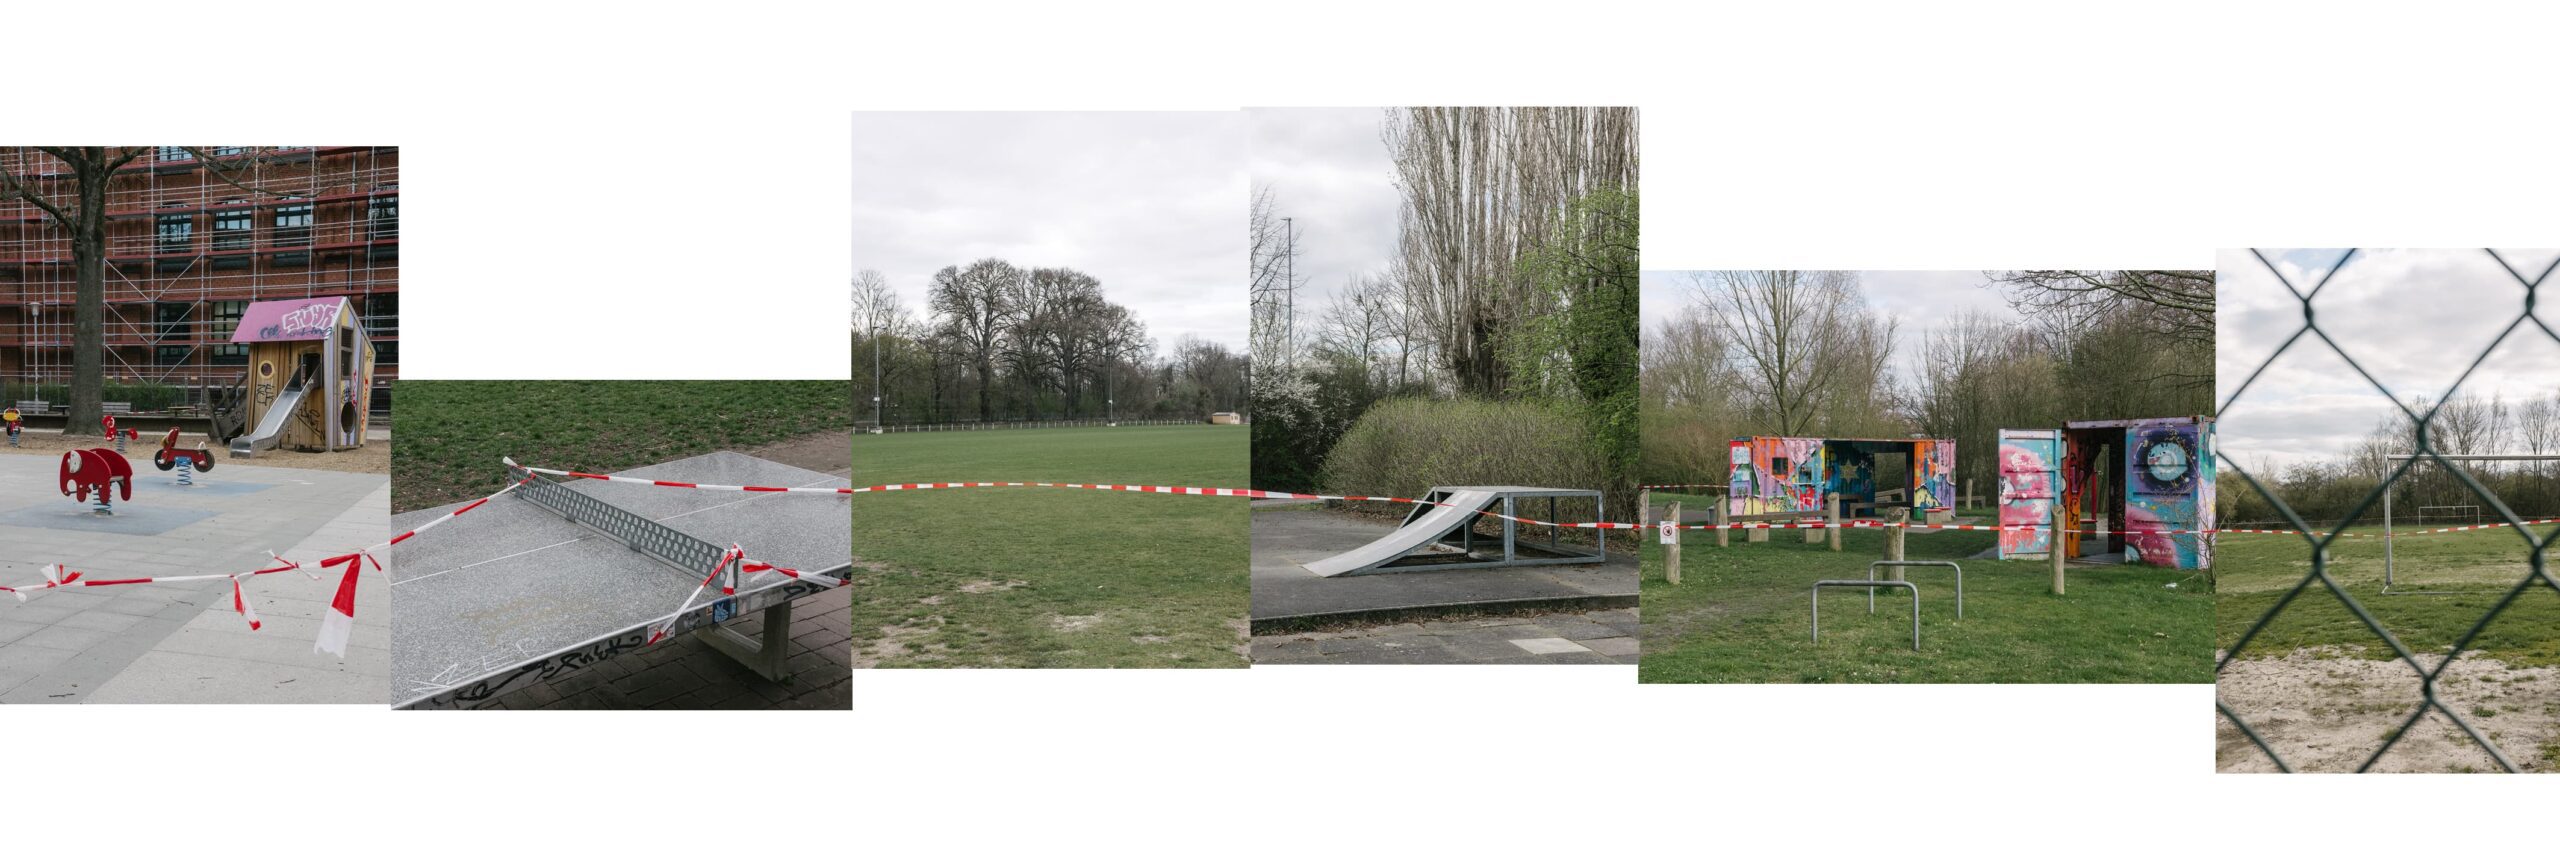 Sports- and playgrounds sealed of with red and white tape.